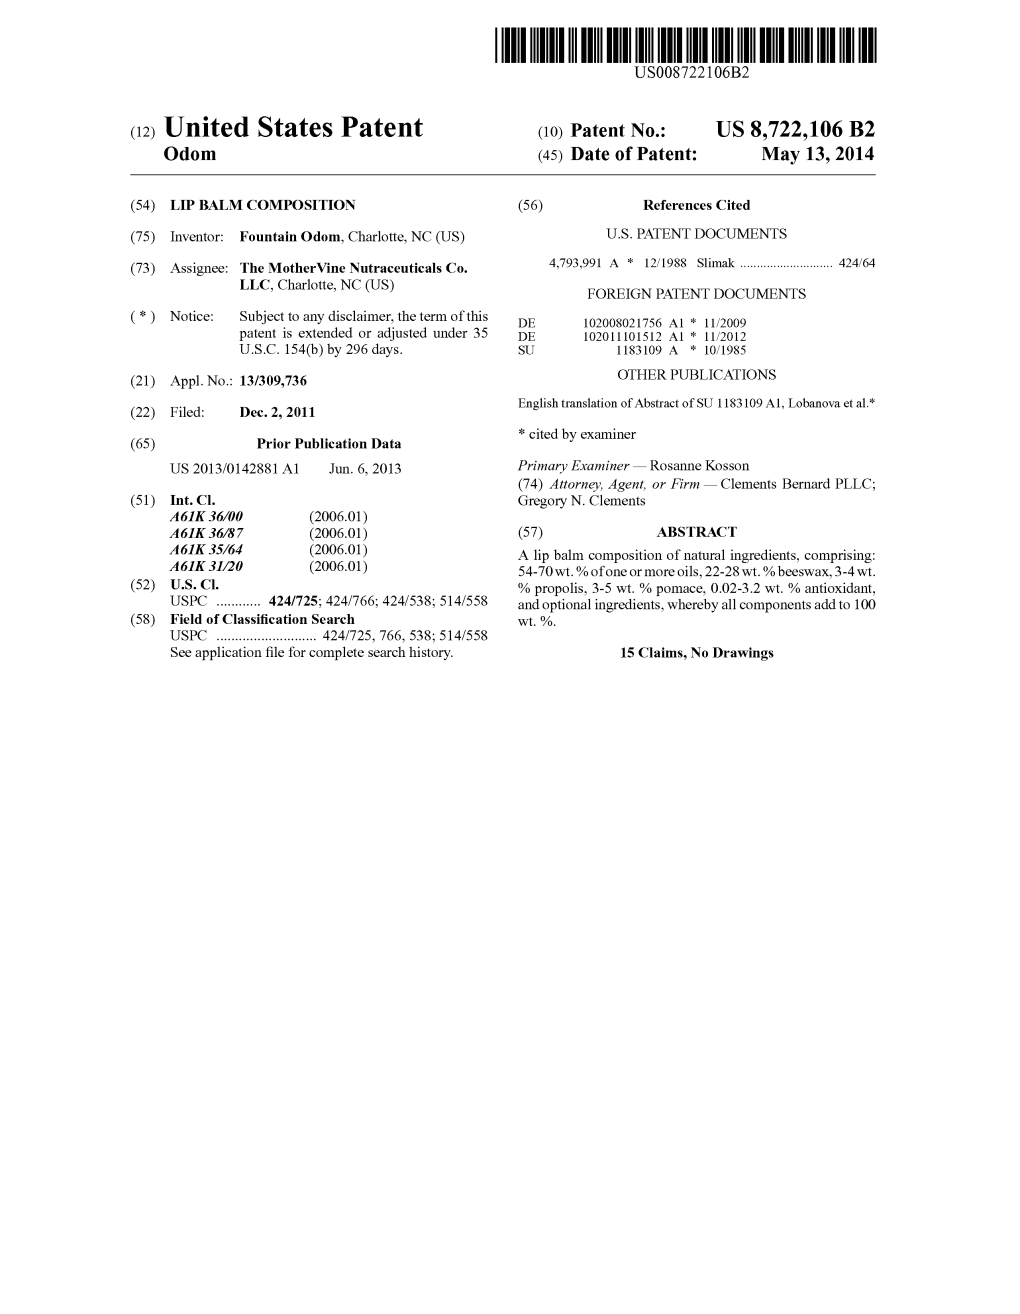 (12) United States Patent (10) Patent No.: US 8,722,106 B2 Odom (45) Date of Patent: May 13, 2014